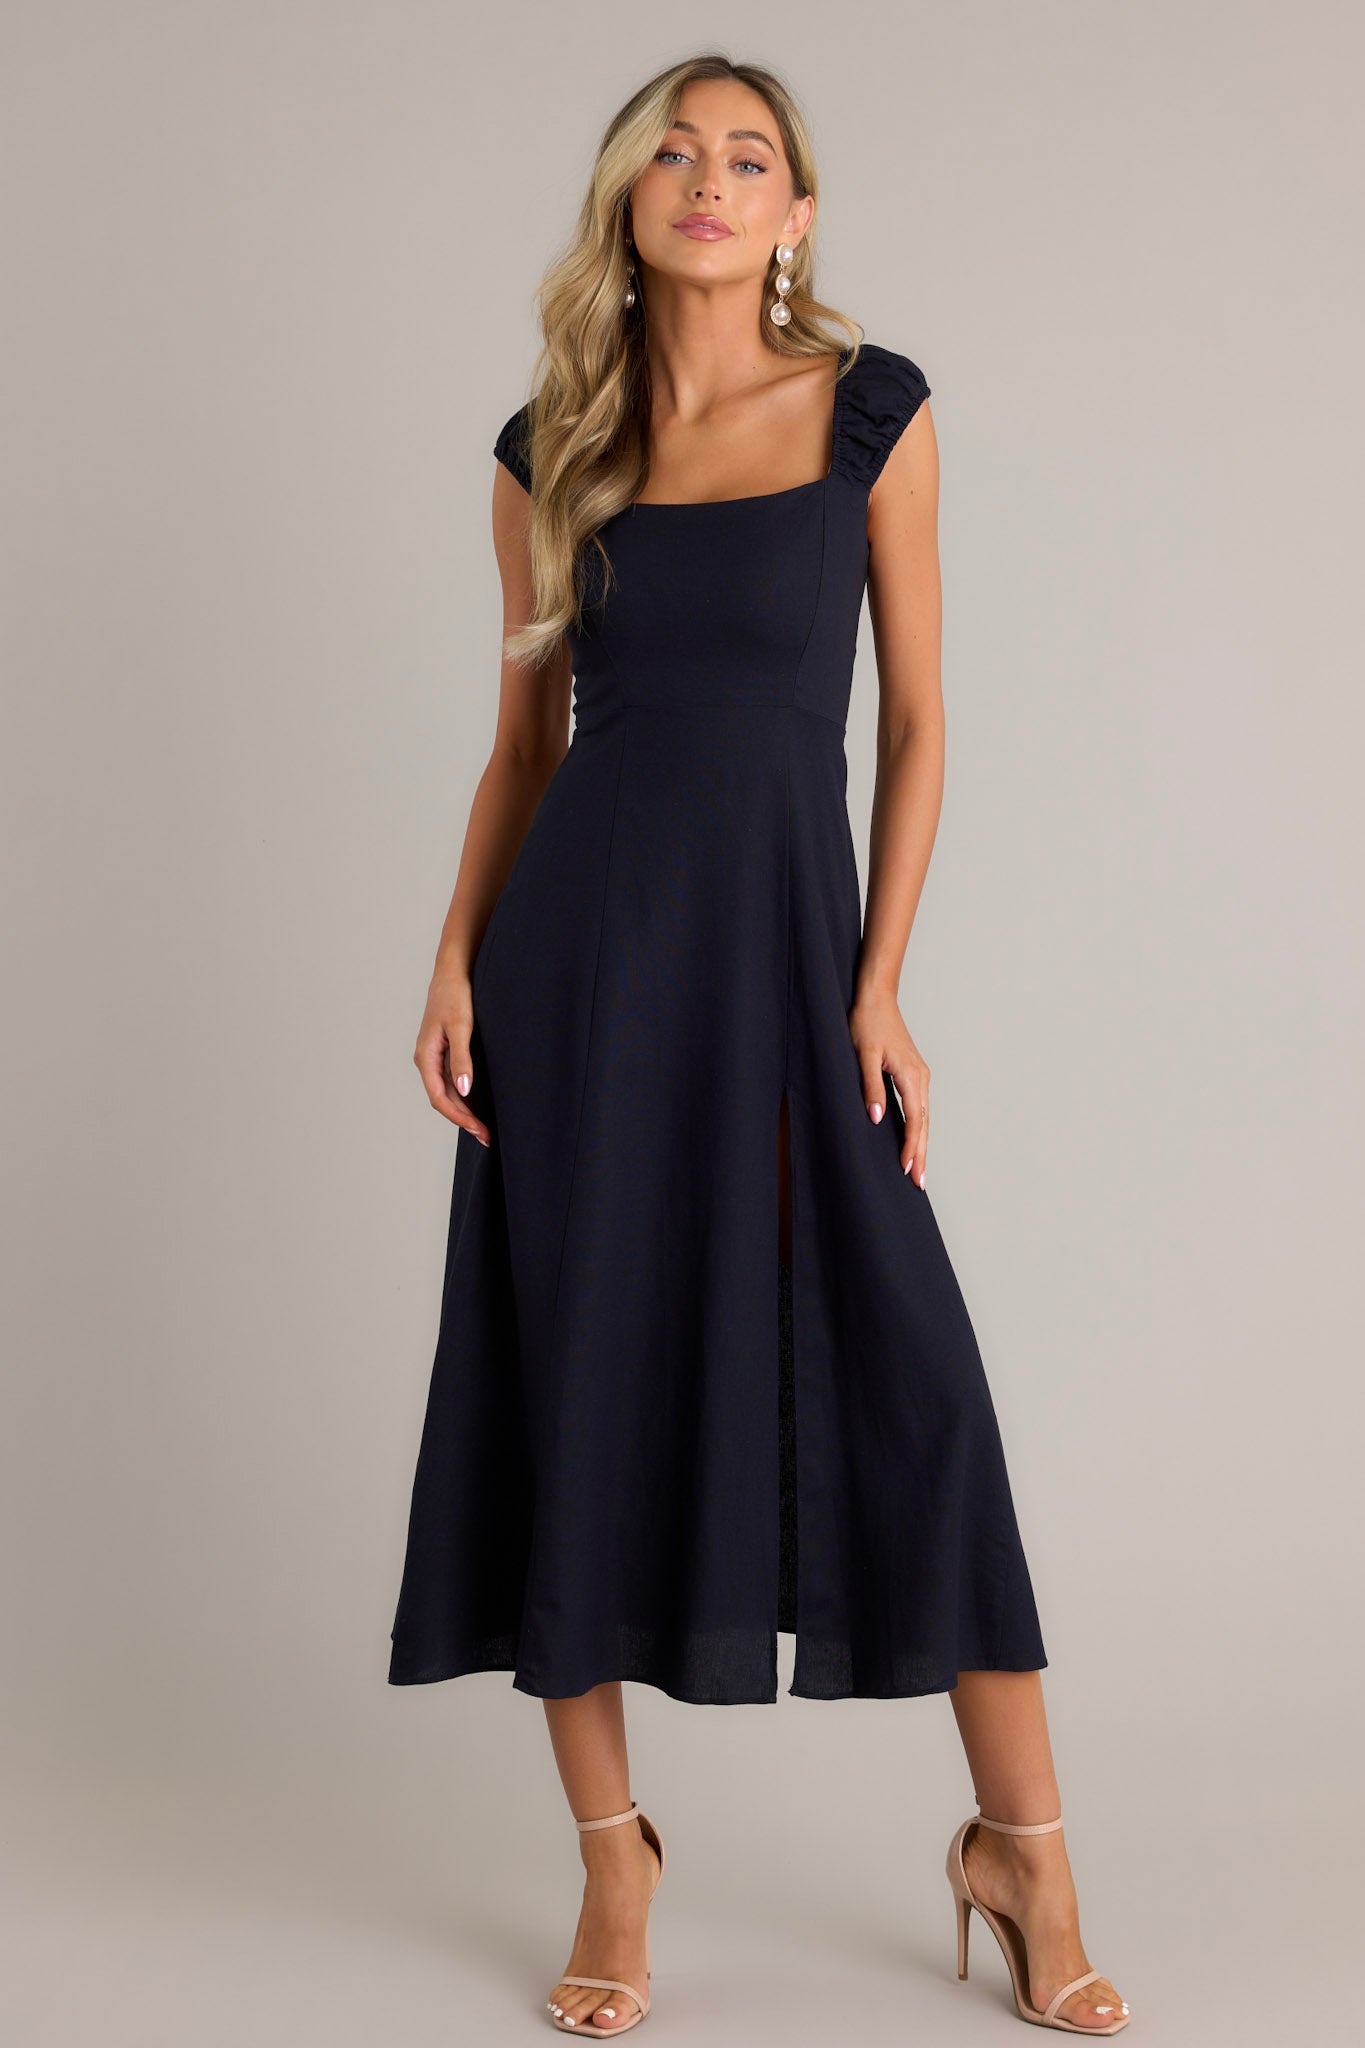 Full length view of a navy midi dress with a square neckline, smocked sleeves, smocked back section, hidden zipper, slit up the leg, and a flowy skirt.